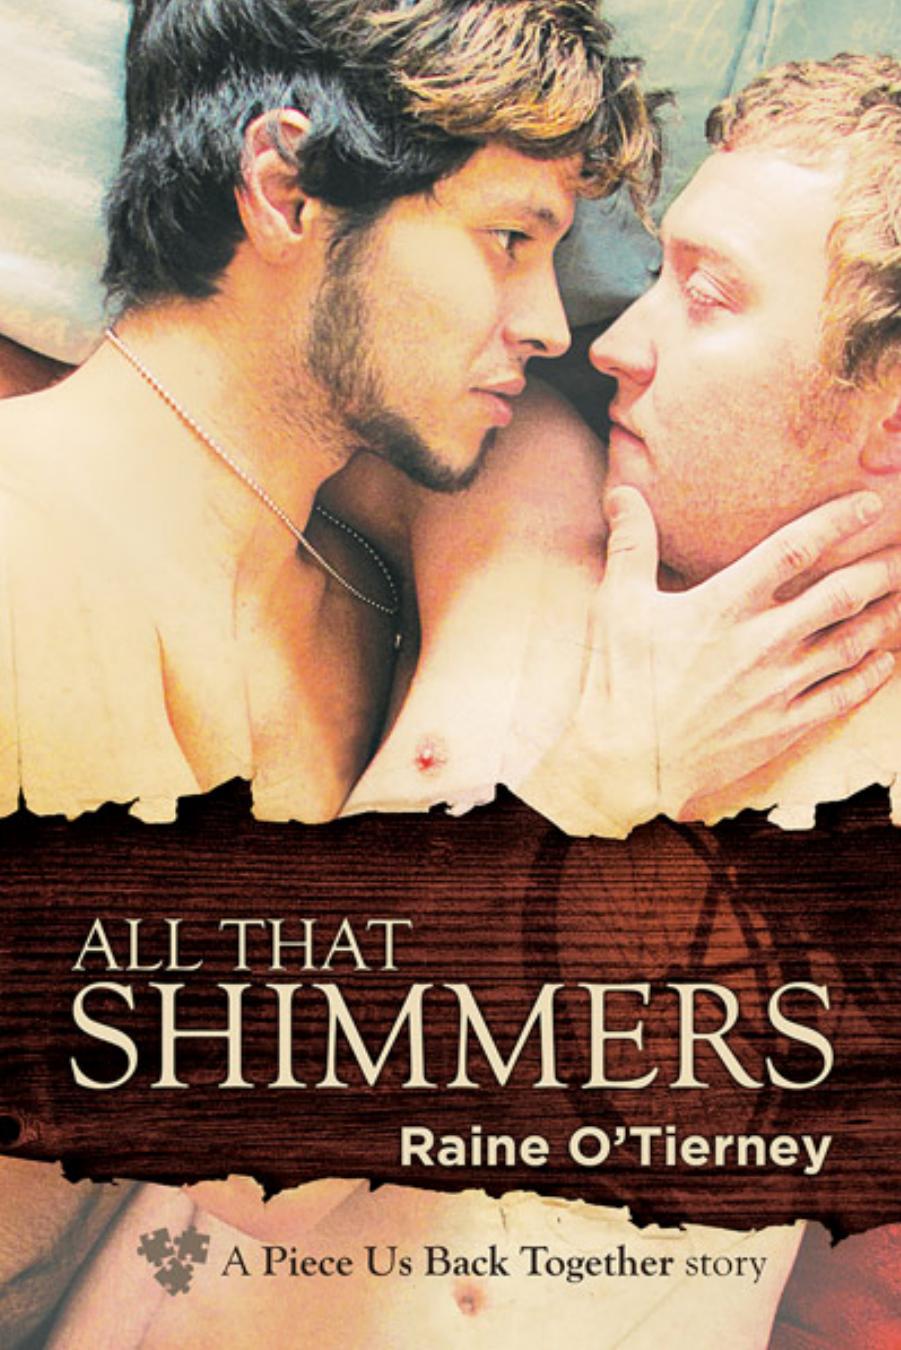 All That Shimmers by Raine O'Tierney